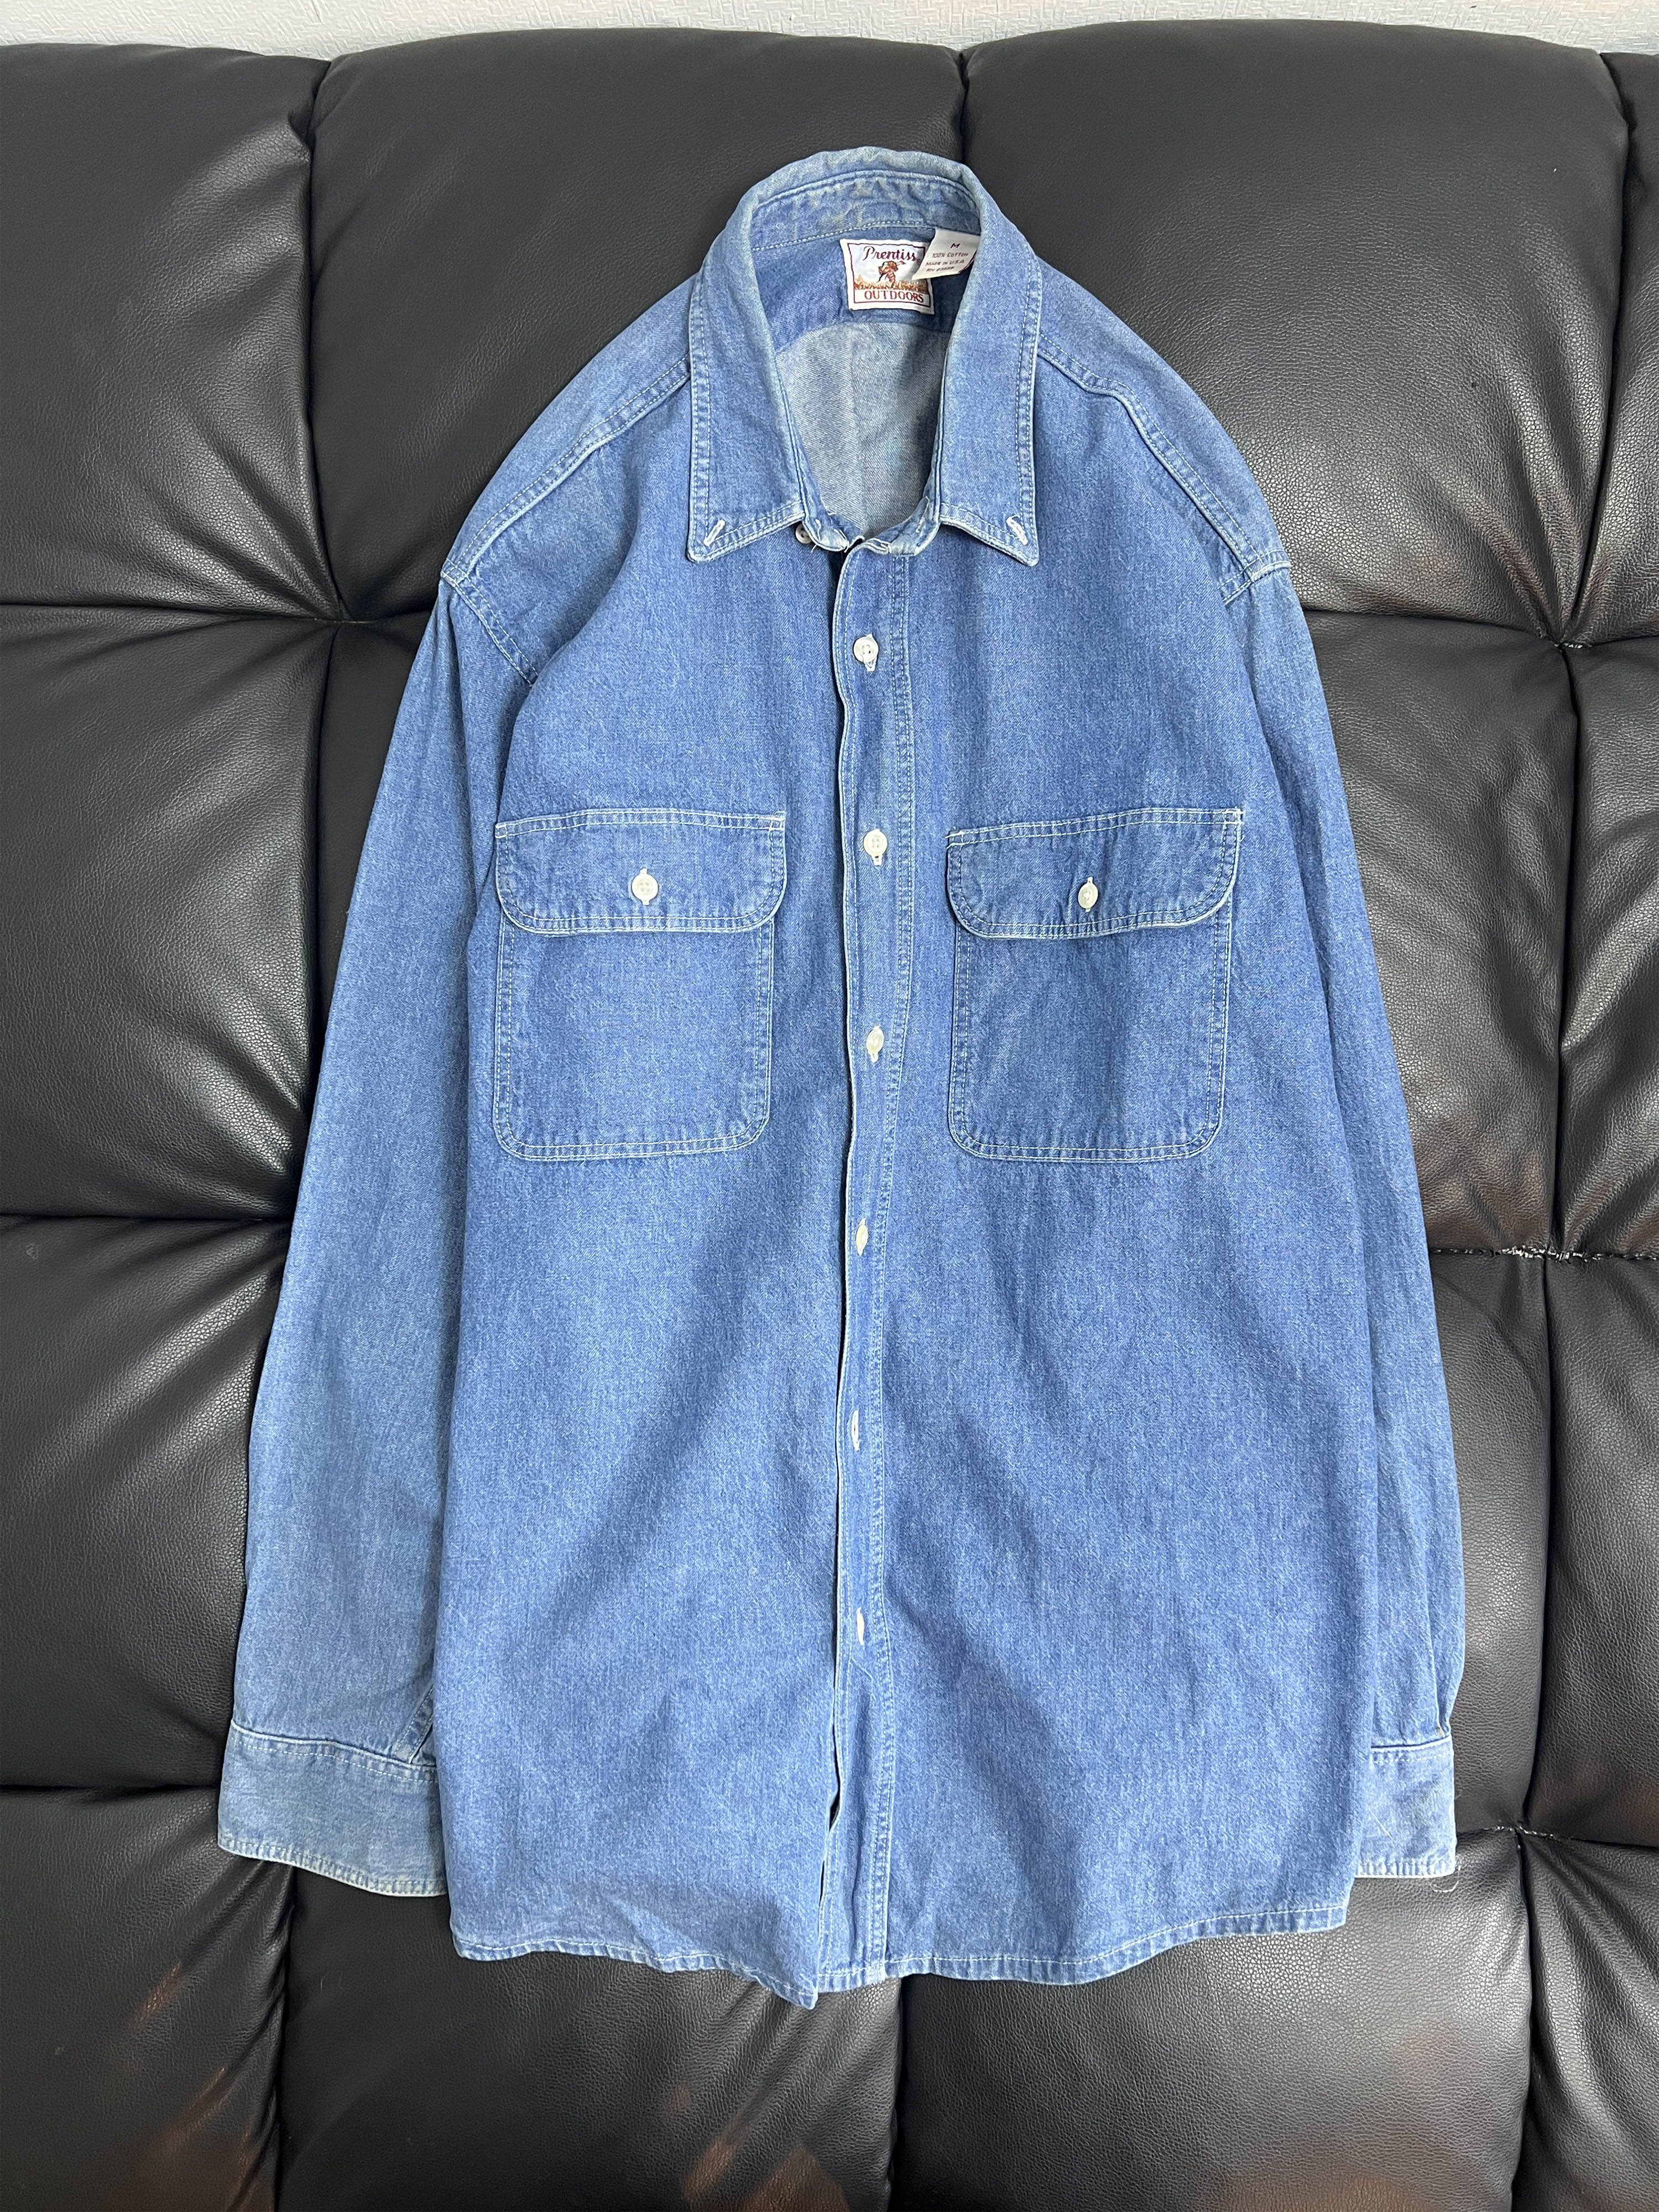 90s PRENTISS OUTDOORS denim shirts ( made in USA )